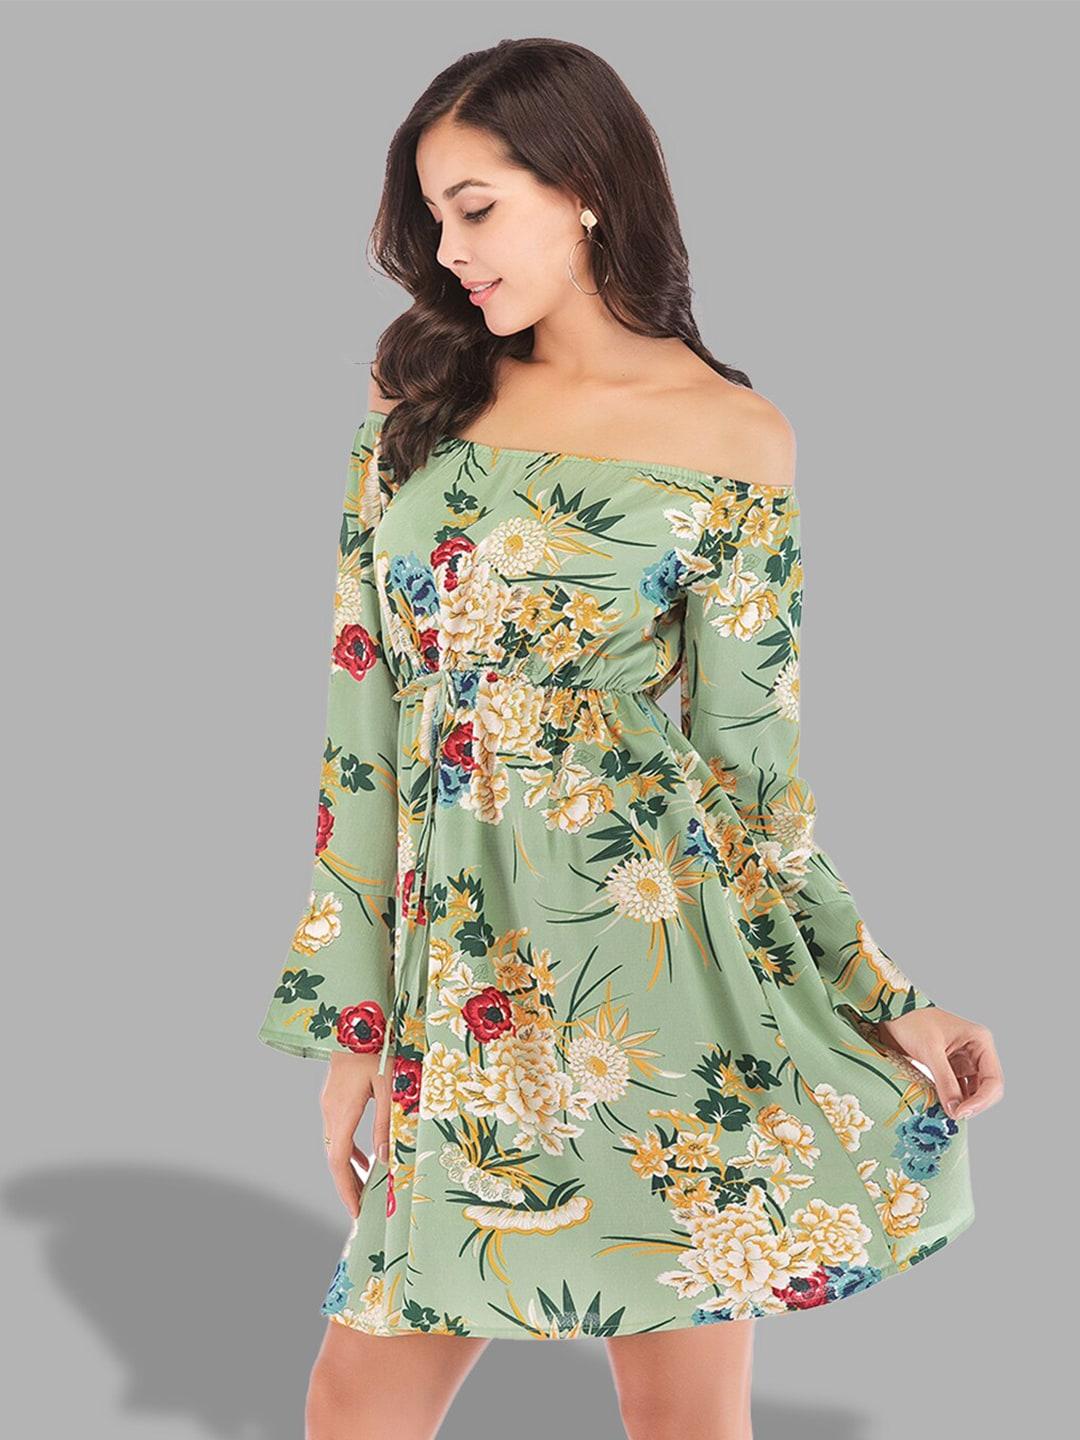 jc-collection-women-green-floral-printed-off-shoulder-empire-dress